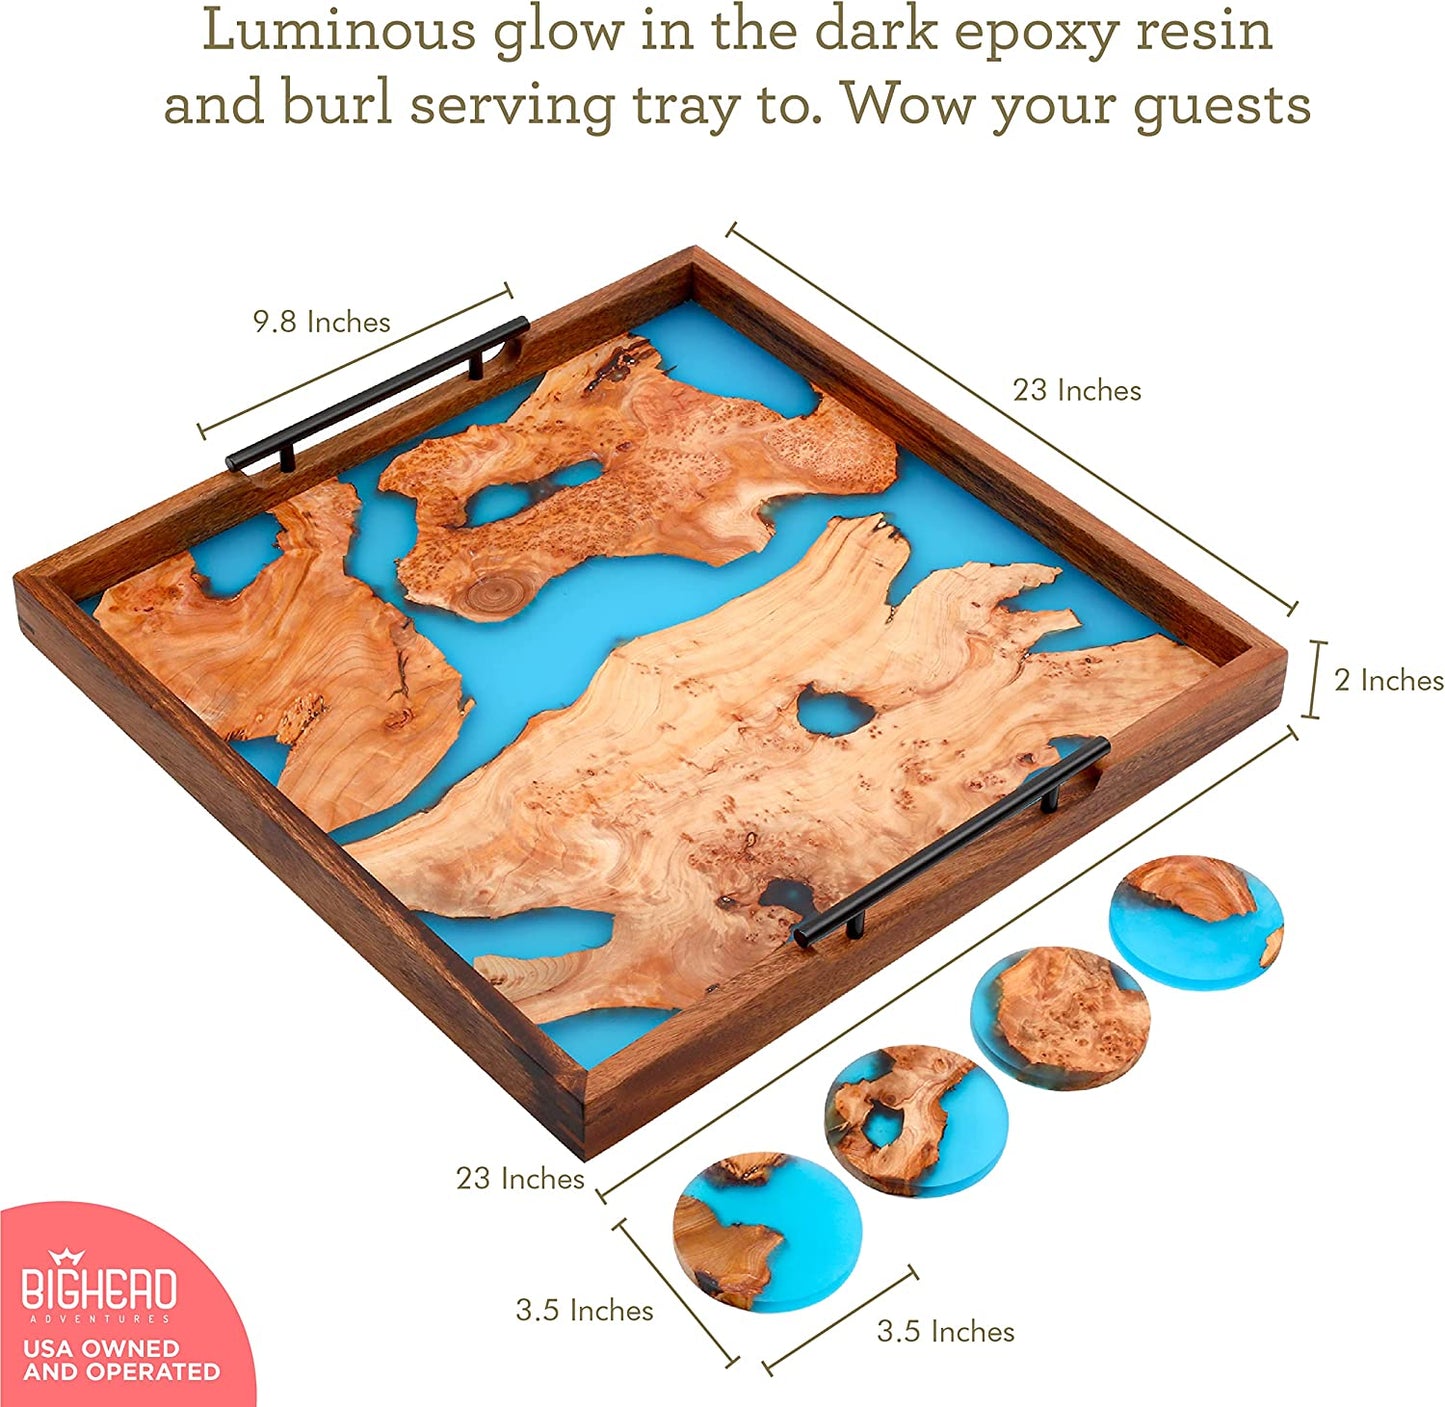 Bighead Epoxy Serving Tray Burl Tray with Glowing Epoxy Resin- Large Sized Epoxy Wooden Tray-Ocean Inspired Resin Serving Tray for Home Decor Coffee Tray-with 4 Coaster Set (Luminous Blue)